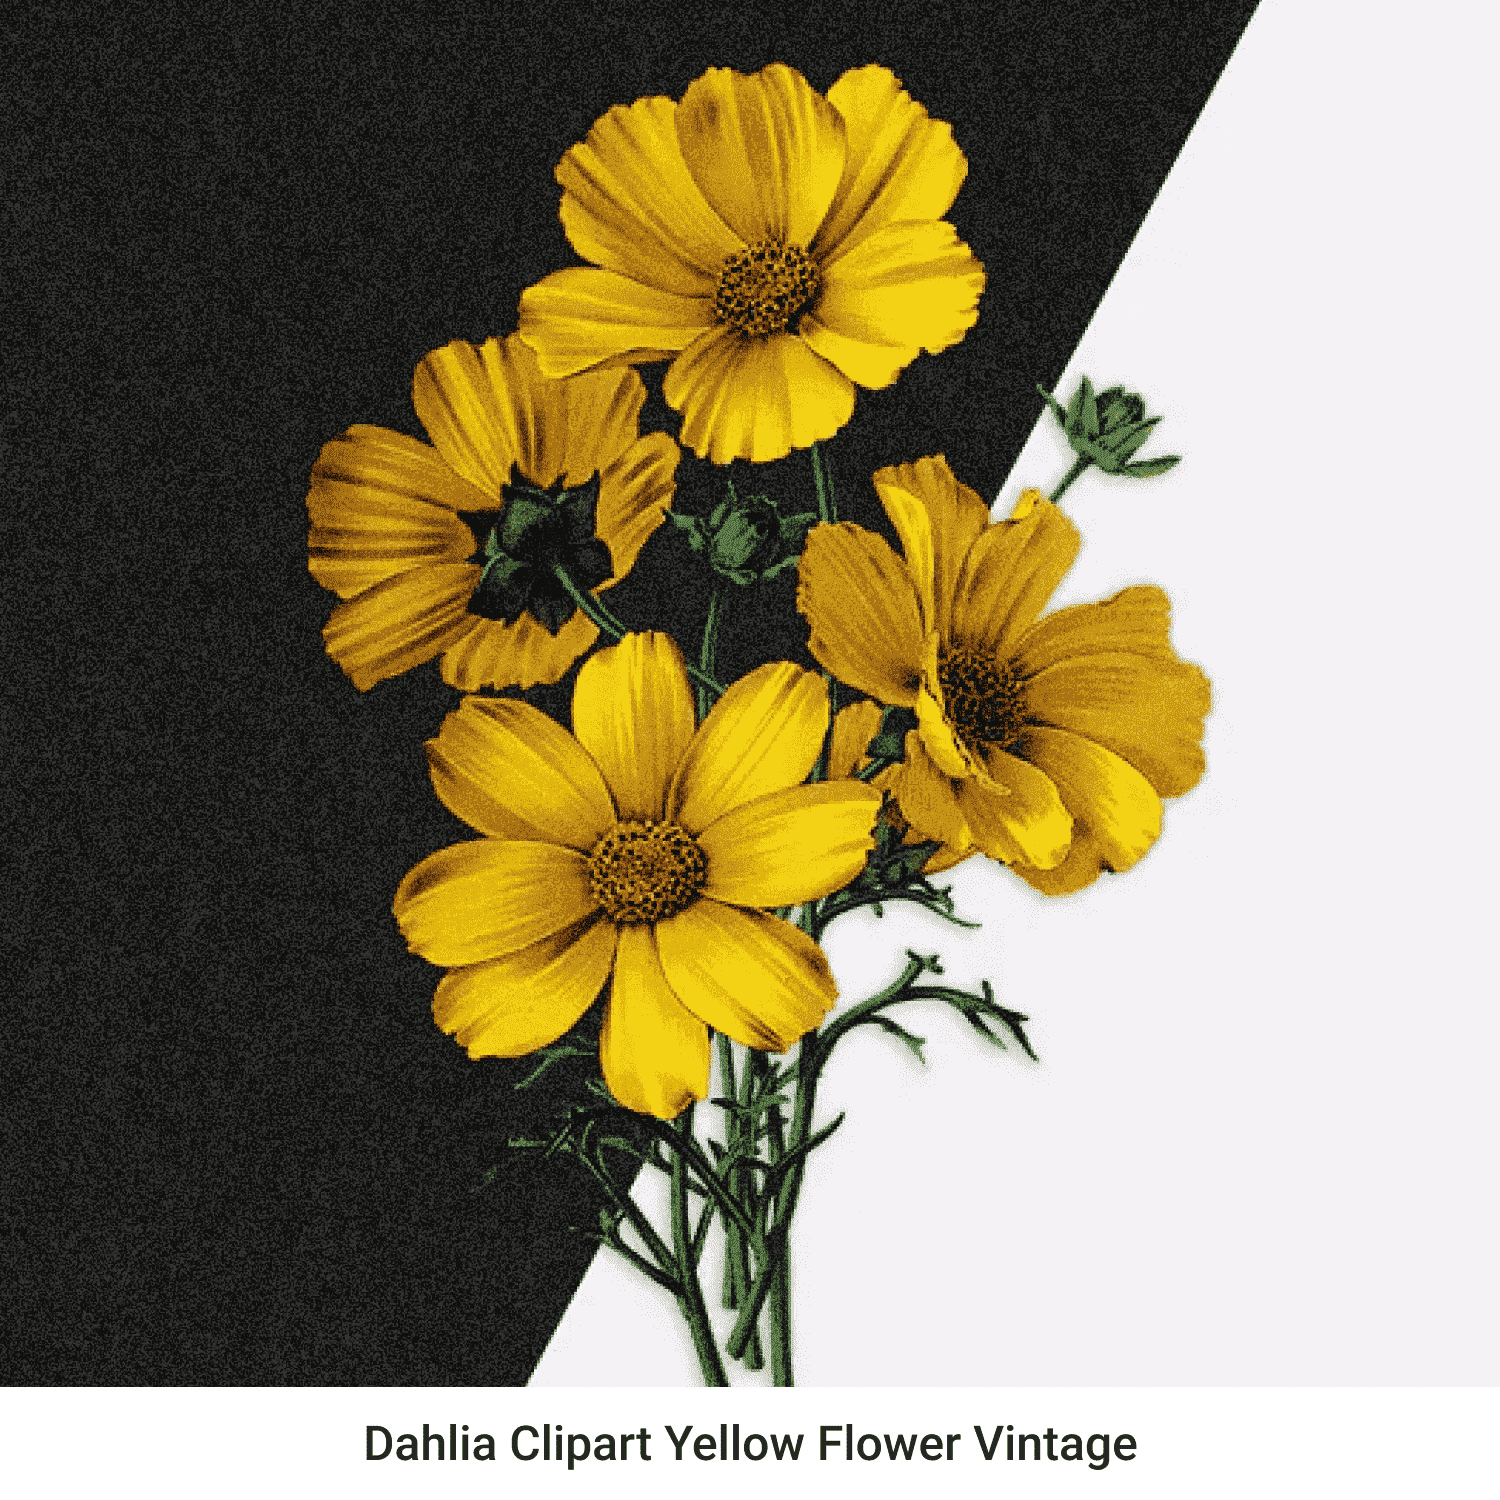 Dahlia Clipart Yellow Flower Vintage - Preview Image.